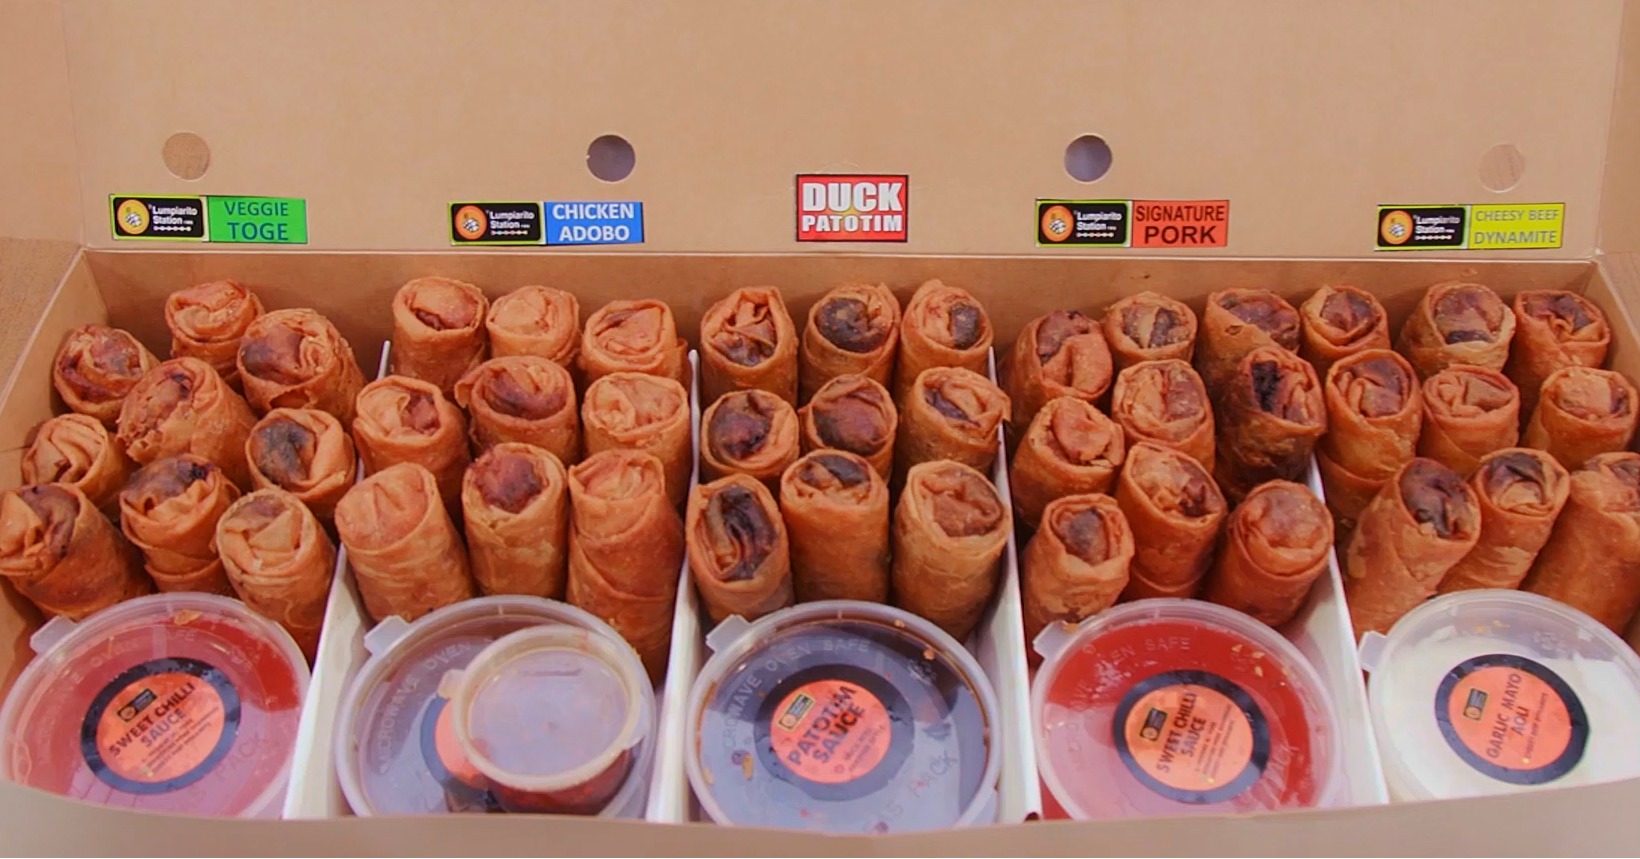 Lumpia-nalo! Entrepreneur Shares How His Lumpia Boxes Business Earns P25K to P75K A Month